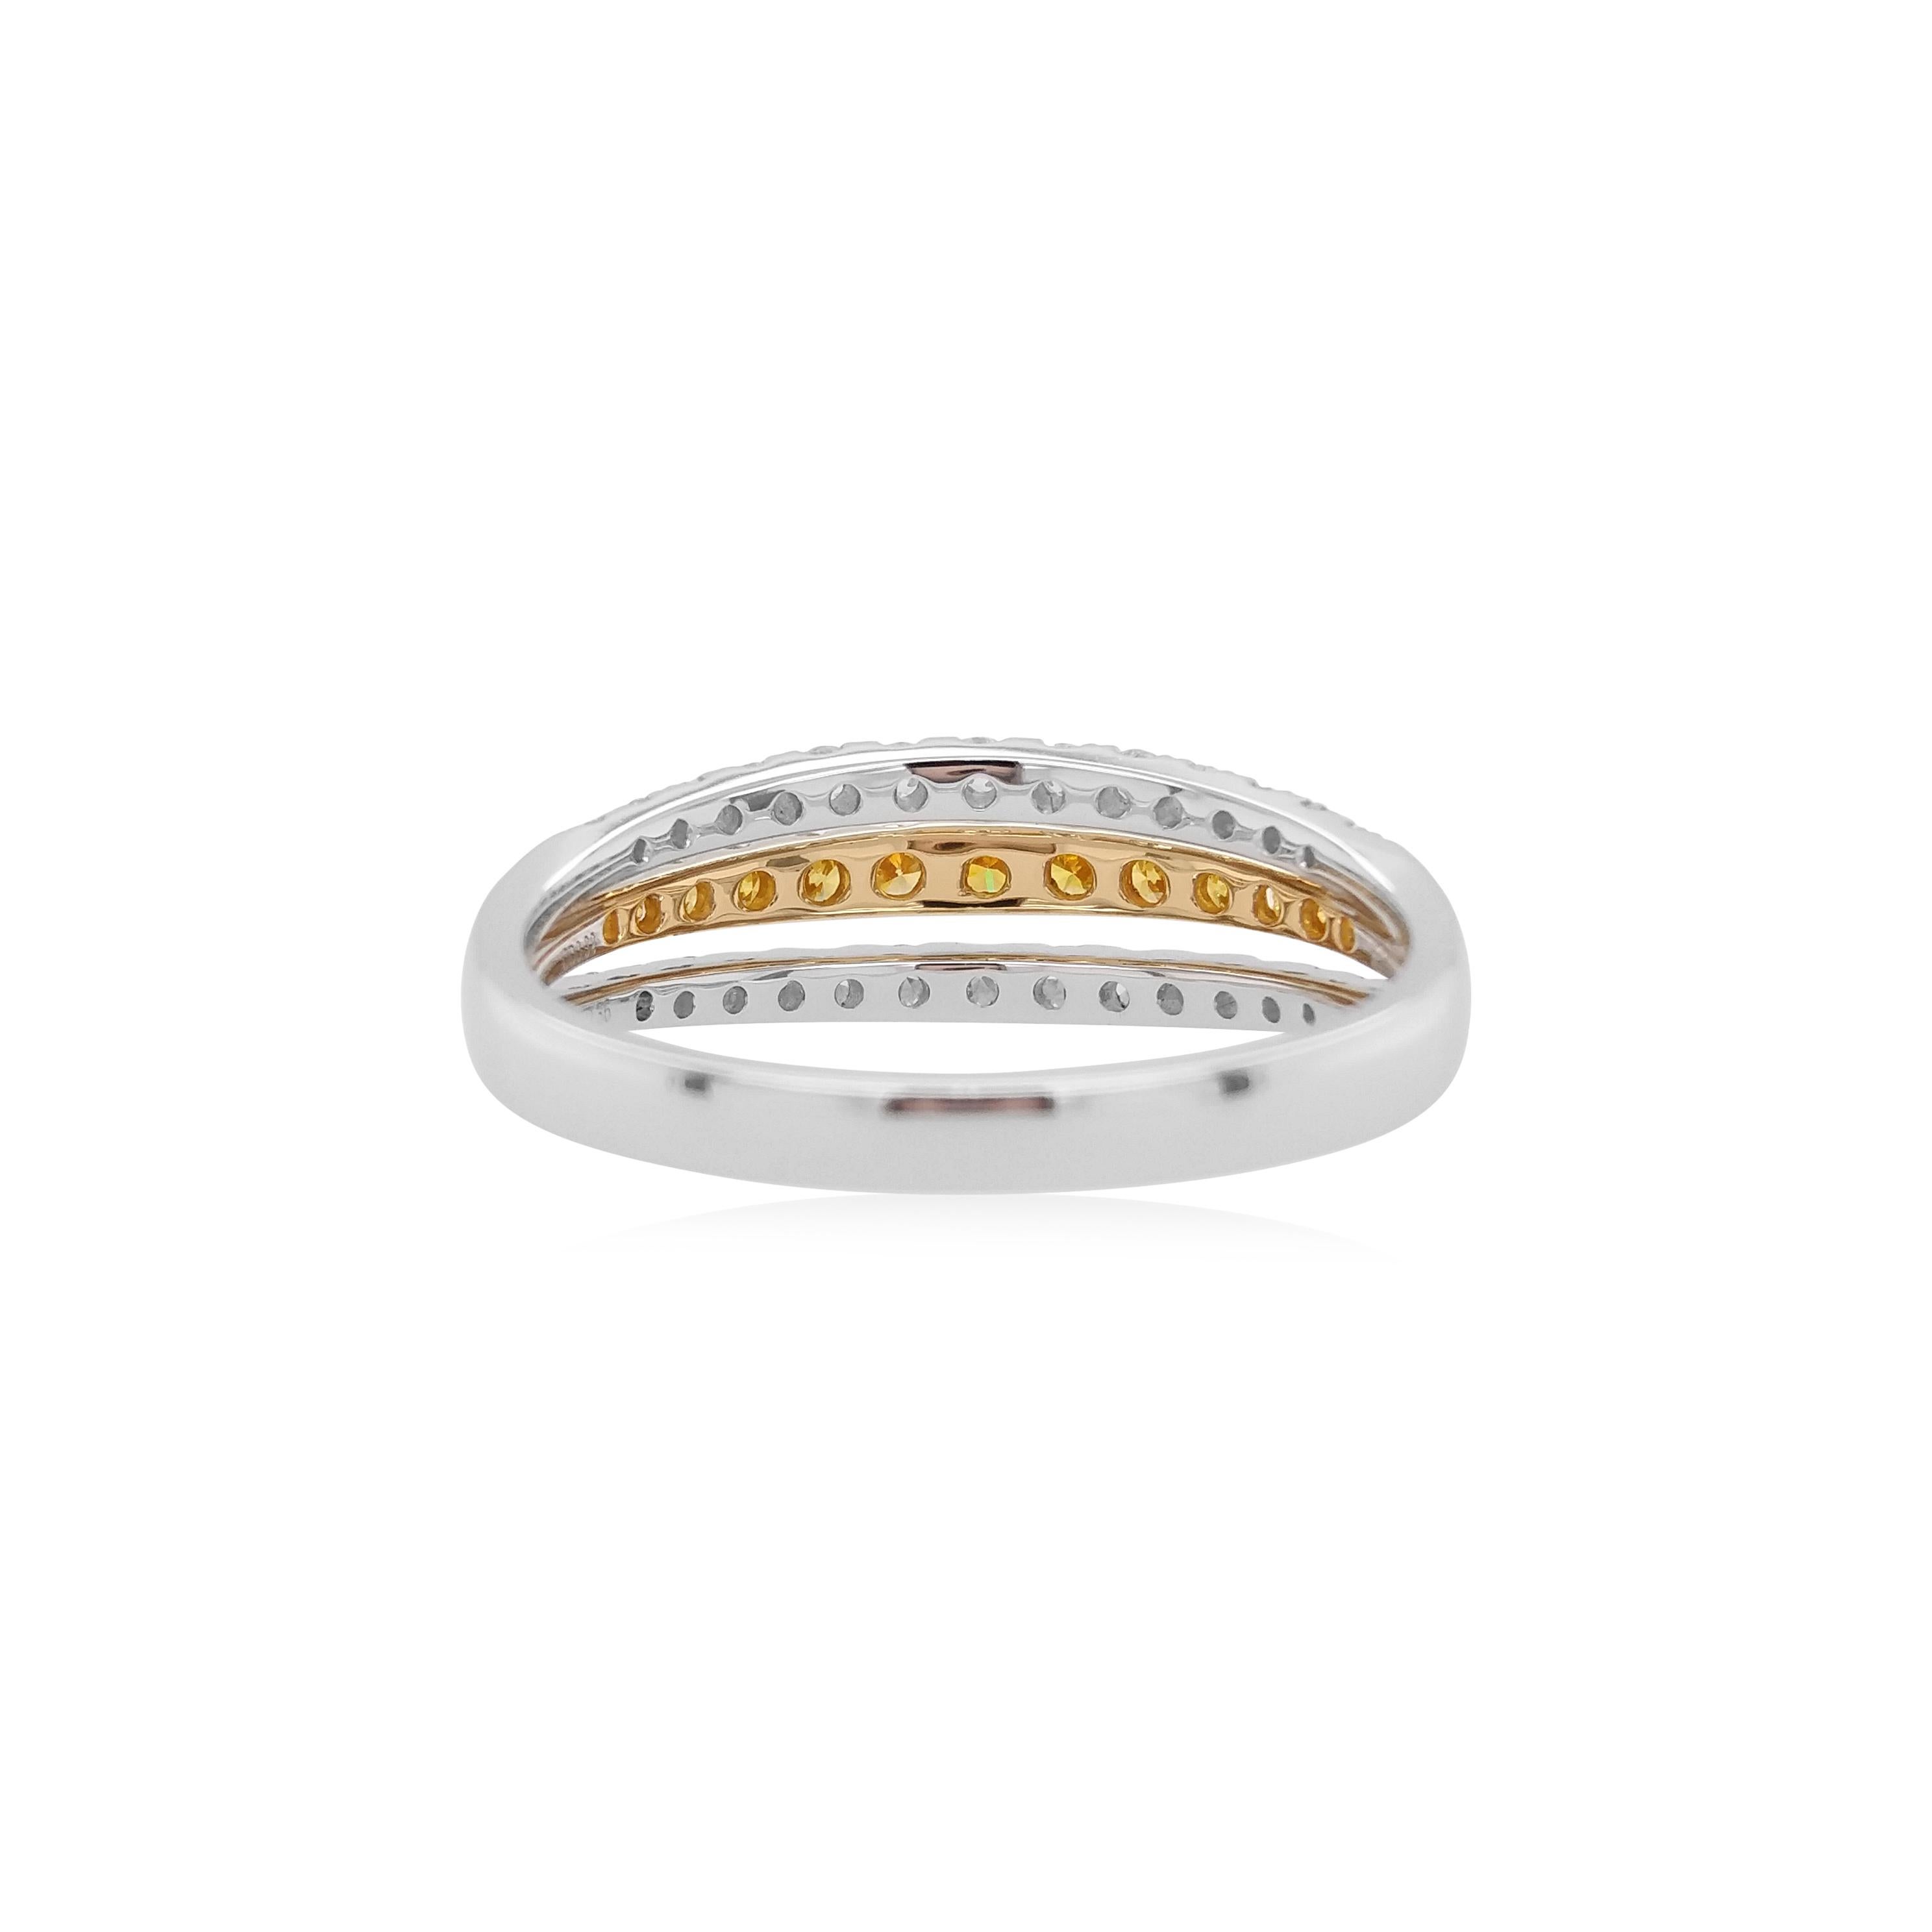 This subtle ring band features a row of scintillating Orange Diamonds at the center of its design. The impressive hues of the orange diamonds are perfectly accentuated by the 18 Karat white and yellow gold setting and sparkling white diamonds